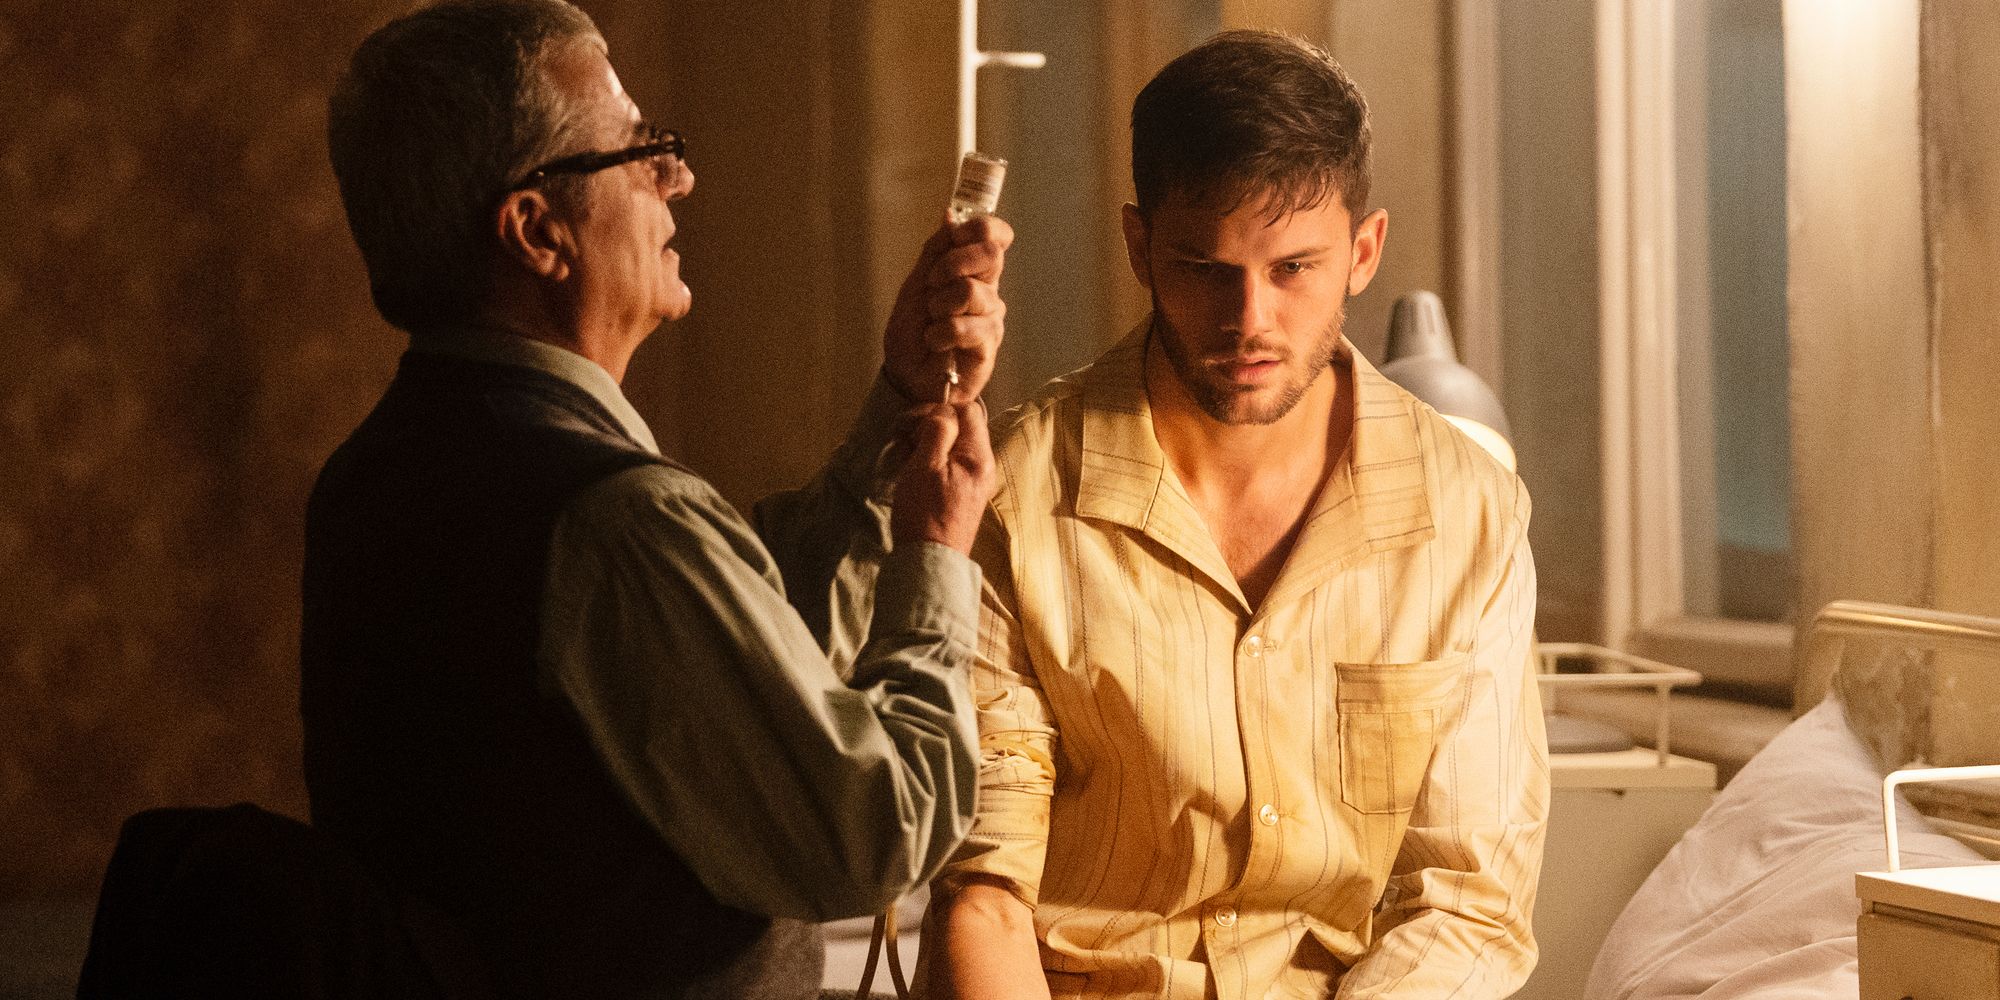 Jeremy Irvine on a hospital bed being treated by a doctor in Treadstone